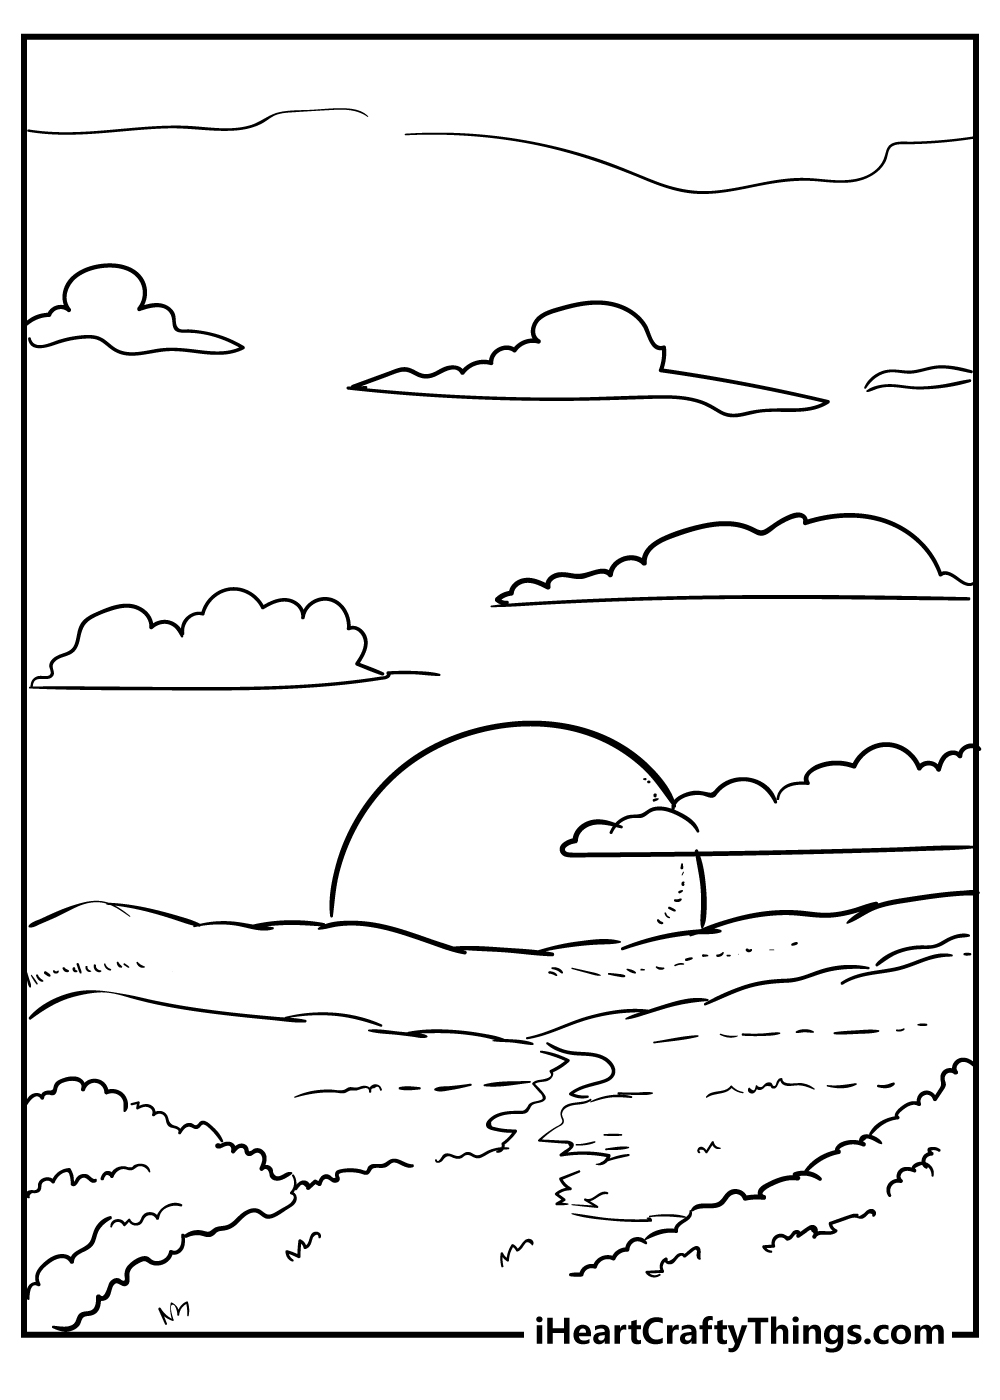 Sunset Coloring Sheet for children free download